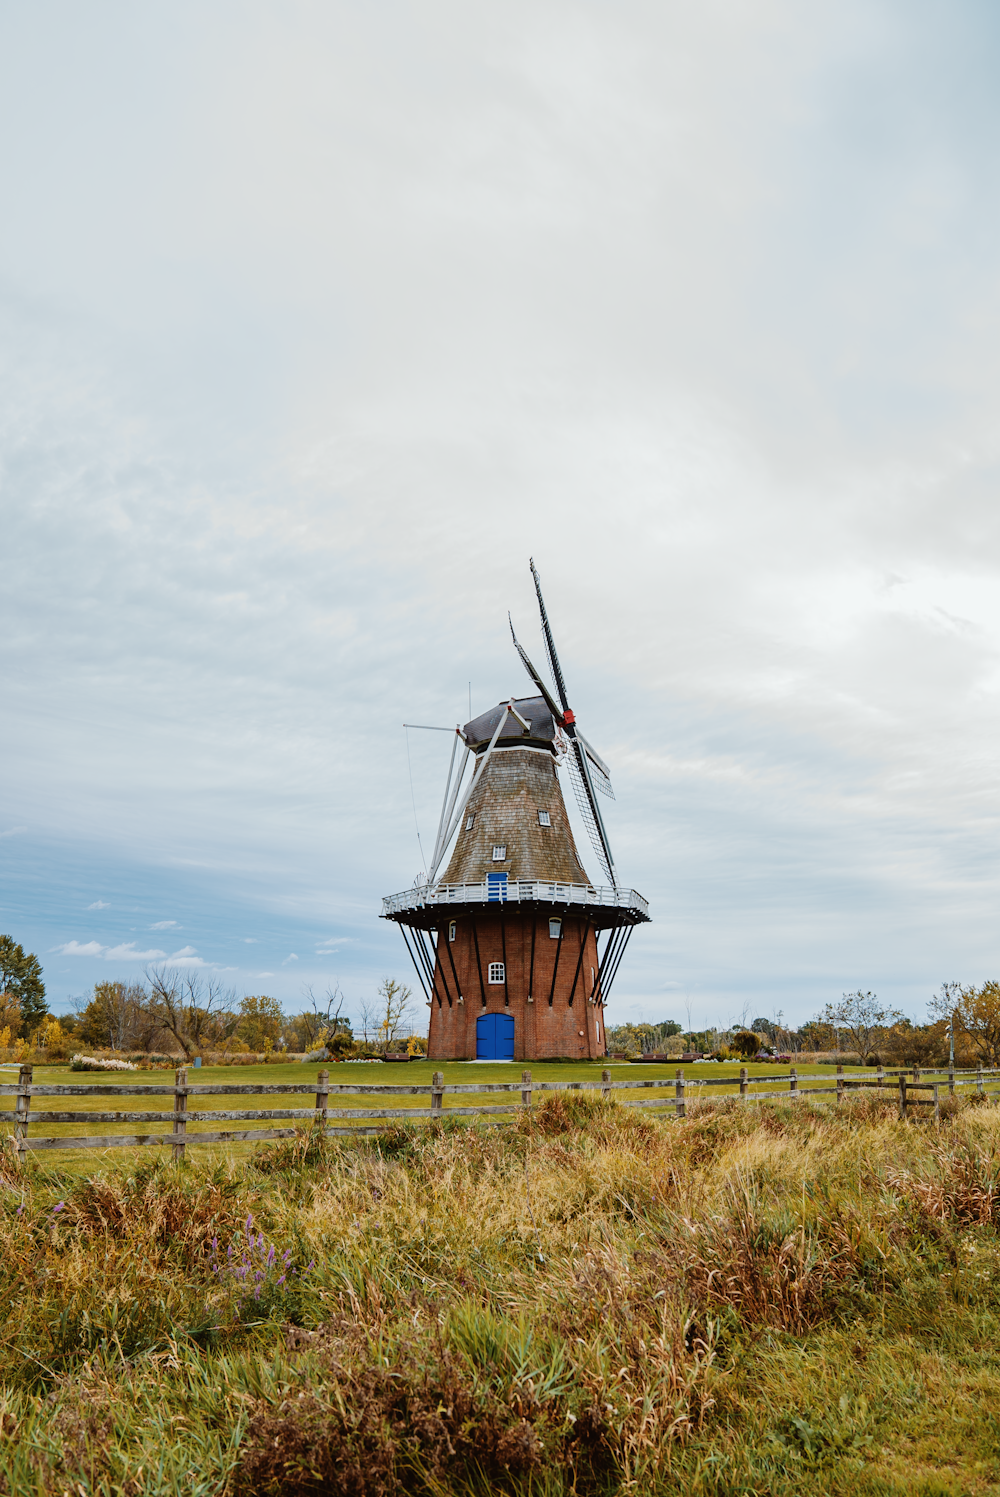 a windmill in a field with a fence around it